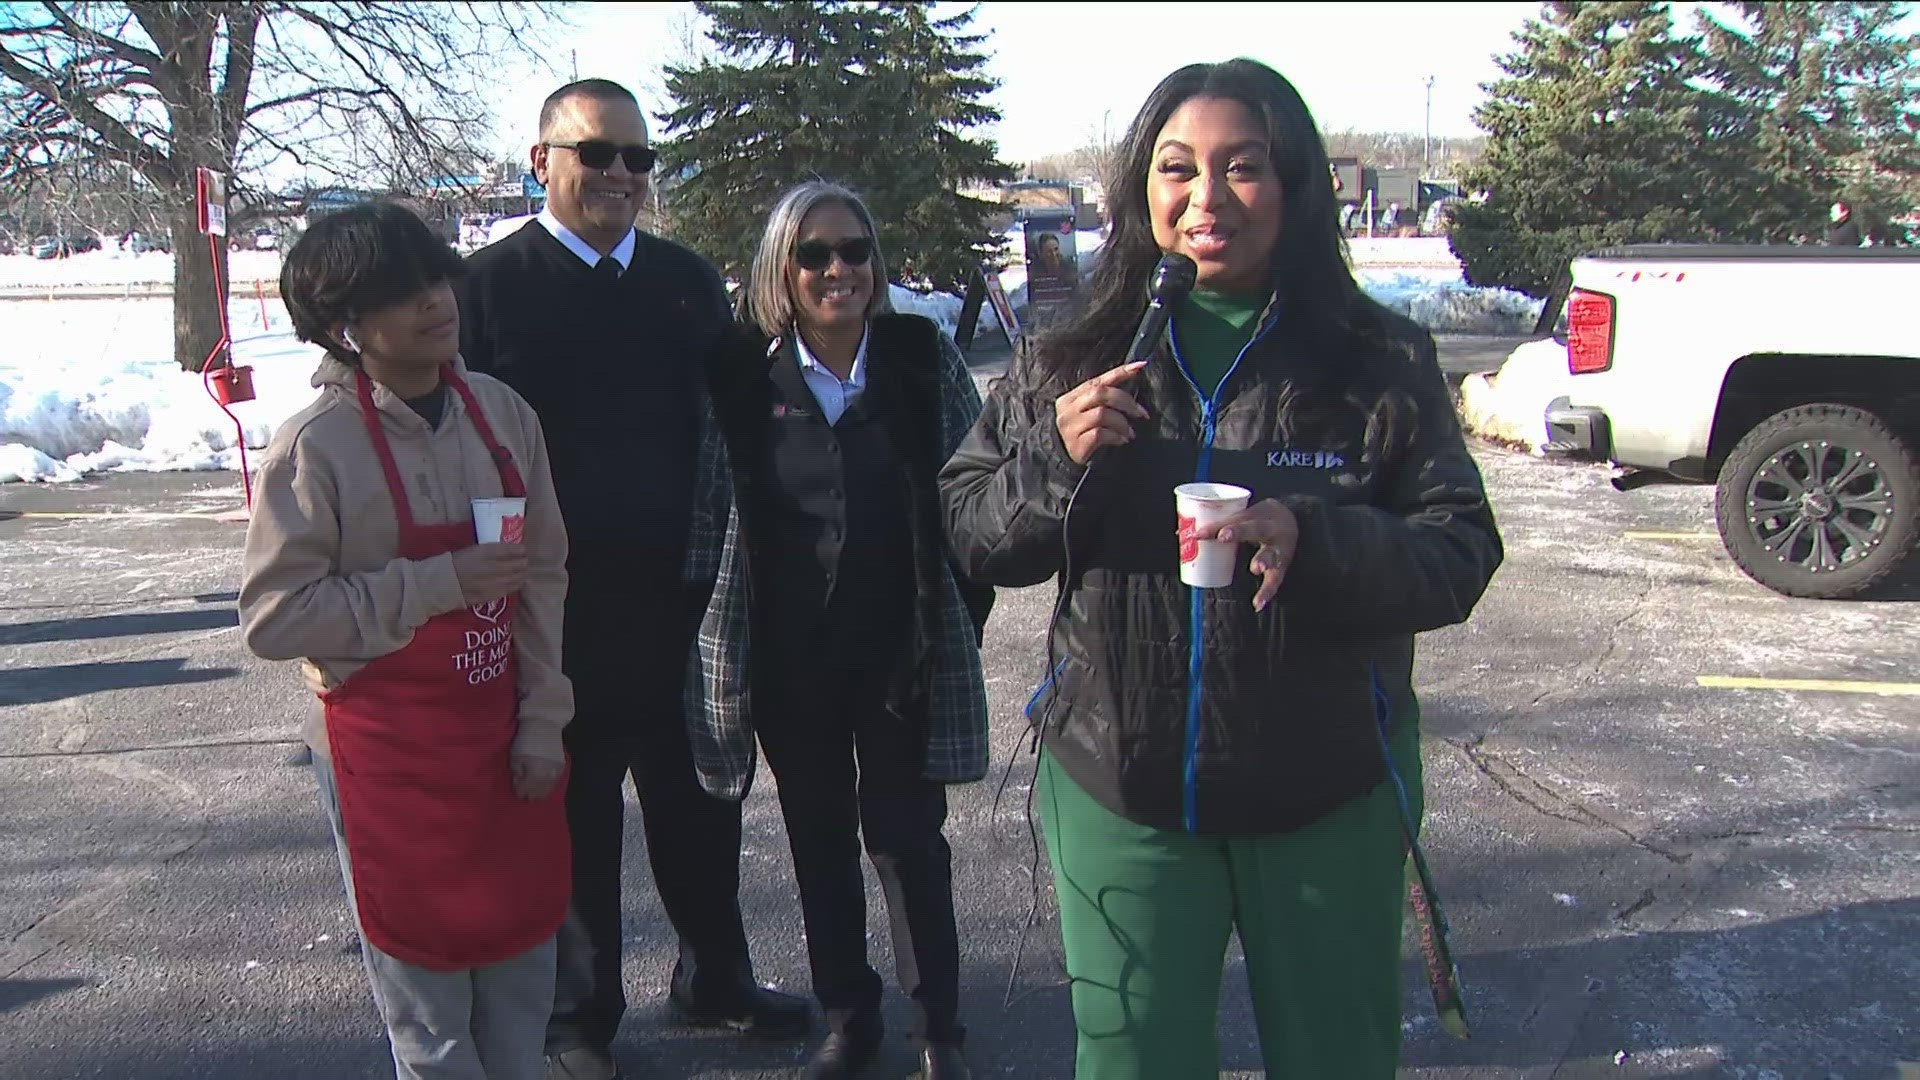 KARE 11, in partnership with Salvation Army North, is making a final push for donations to support families facing food insecurity in Minnesota.